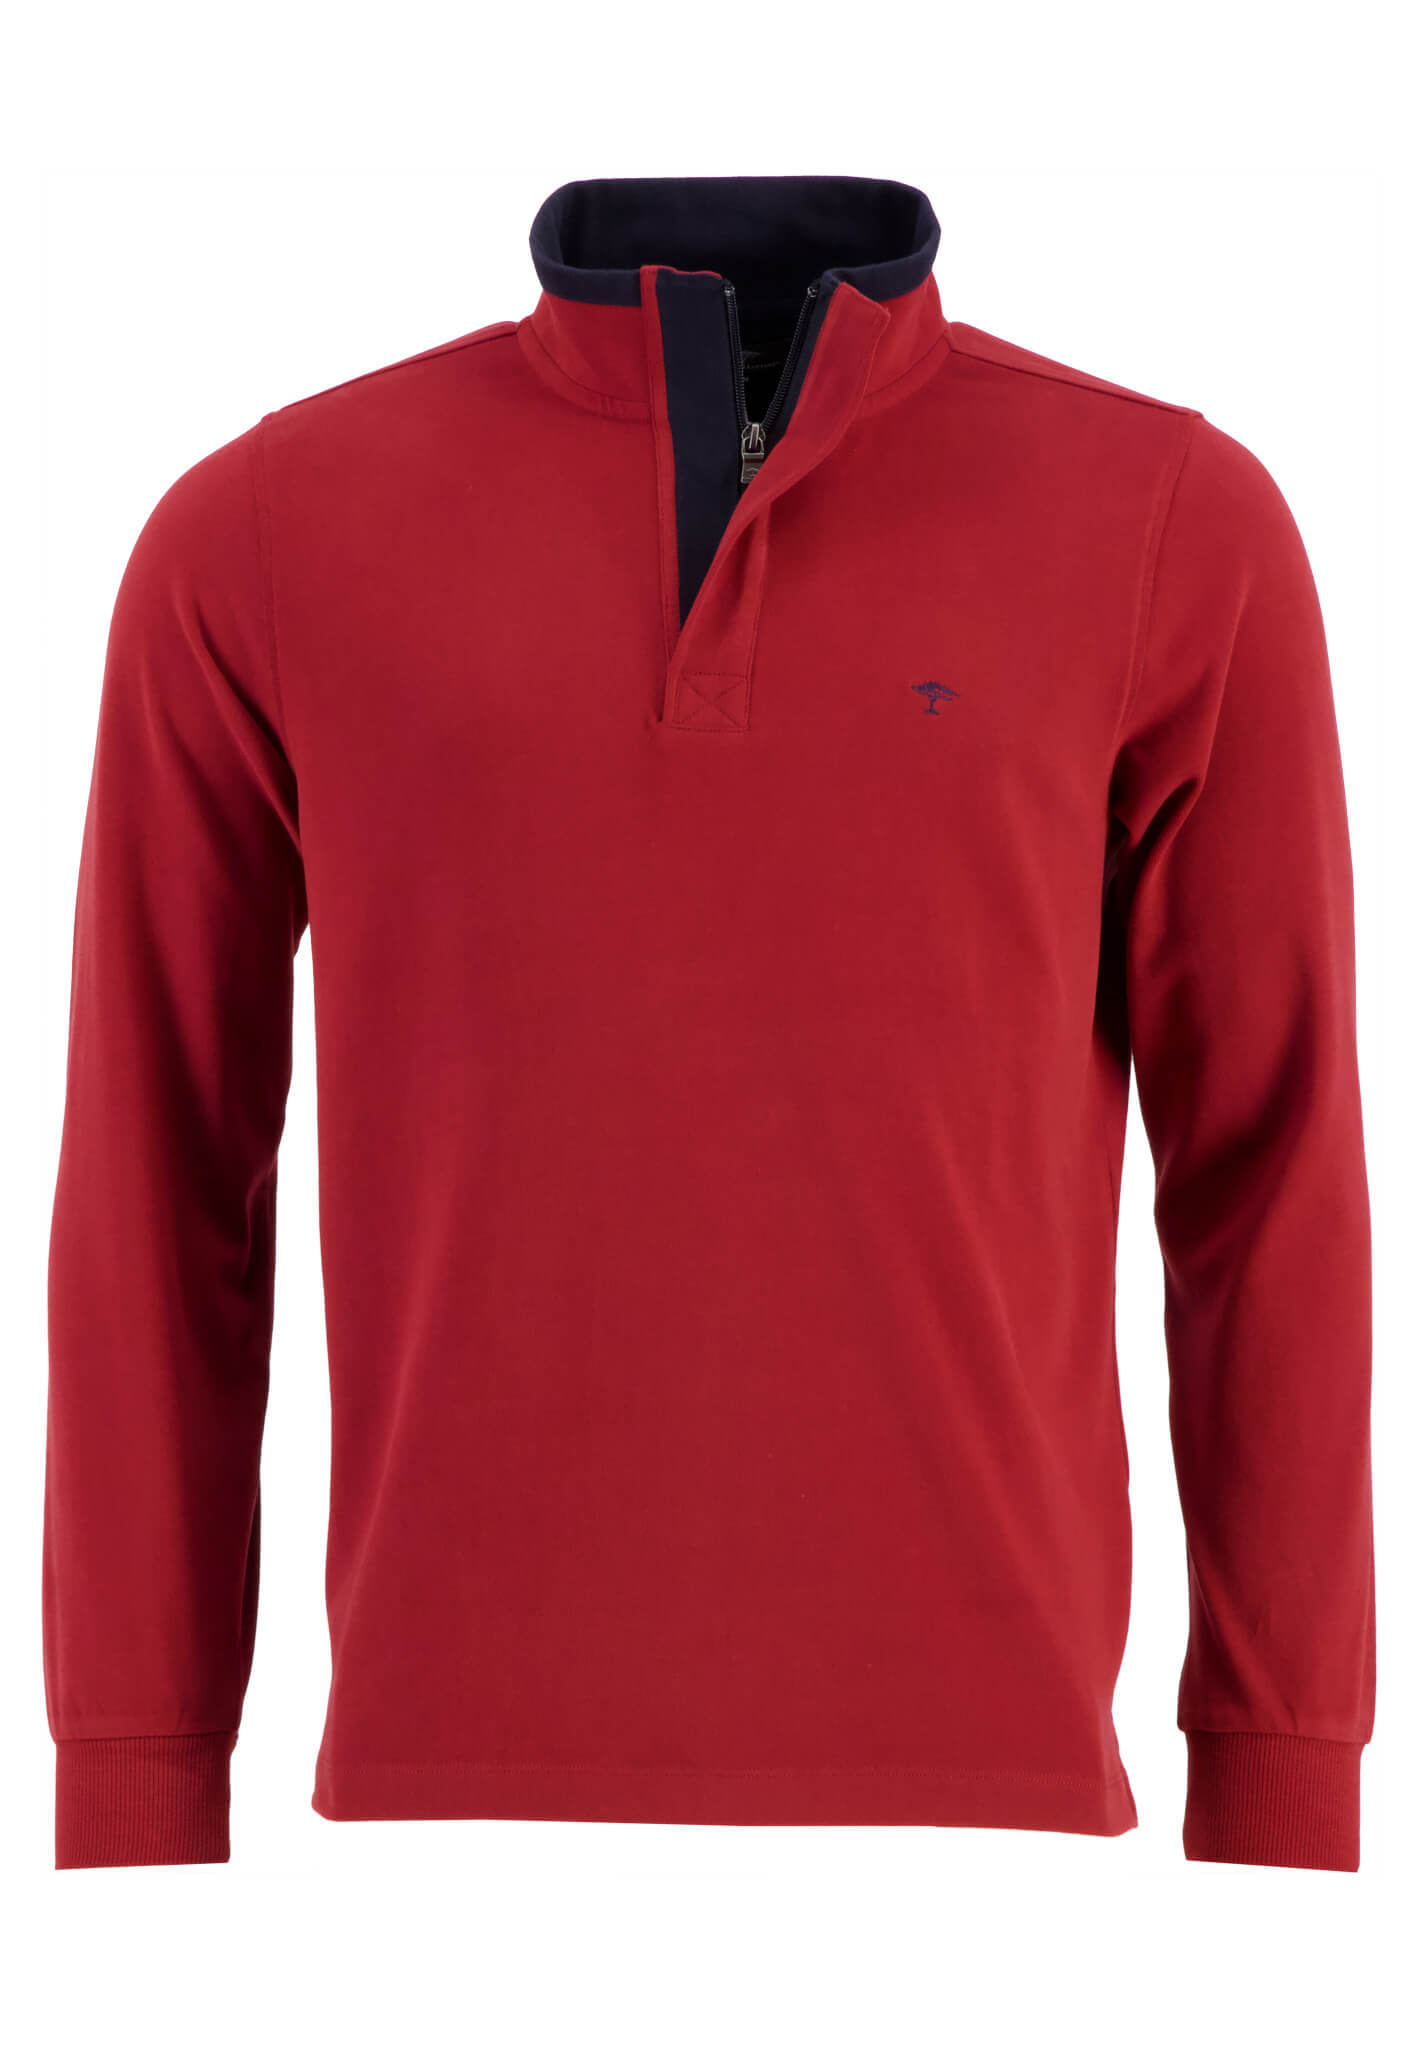 1716 PLAIN RUGBY TOP - RED - Cain of Heswall